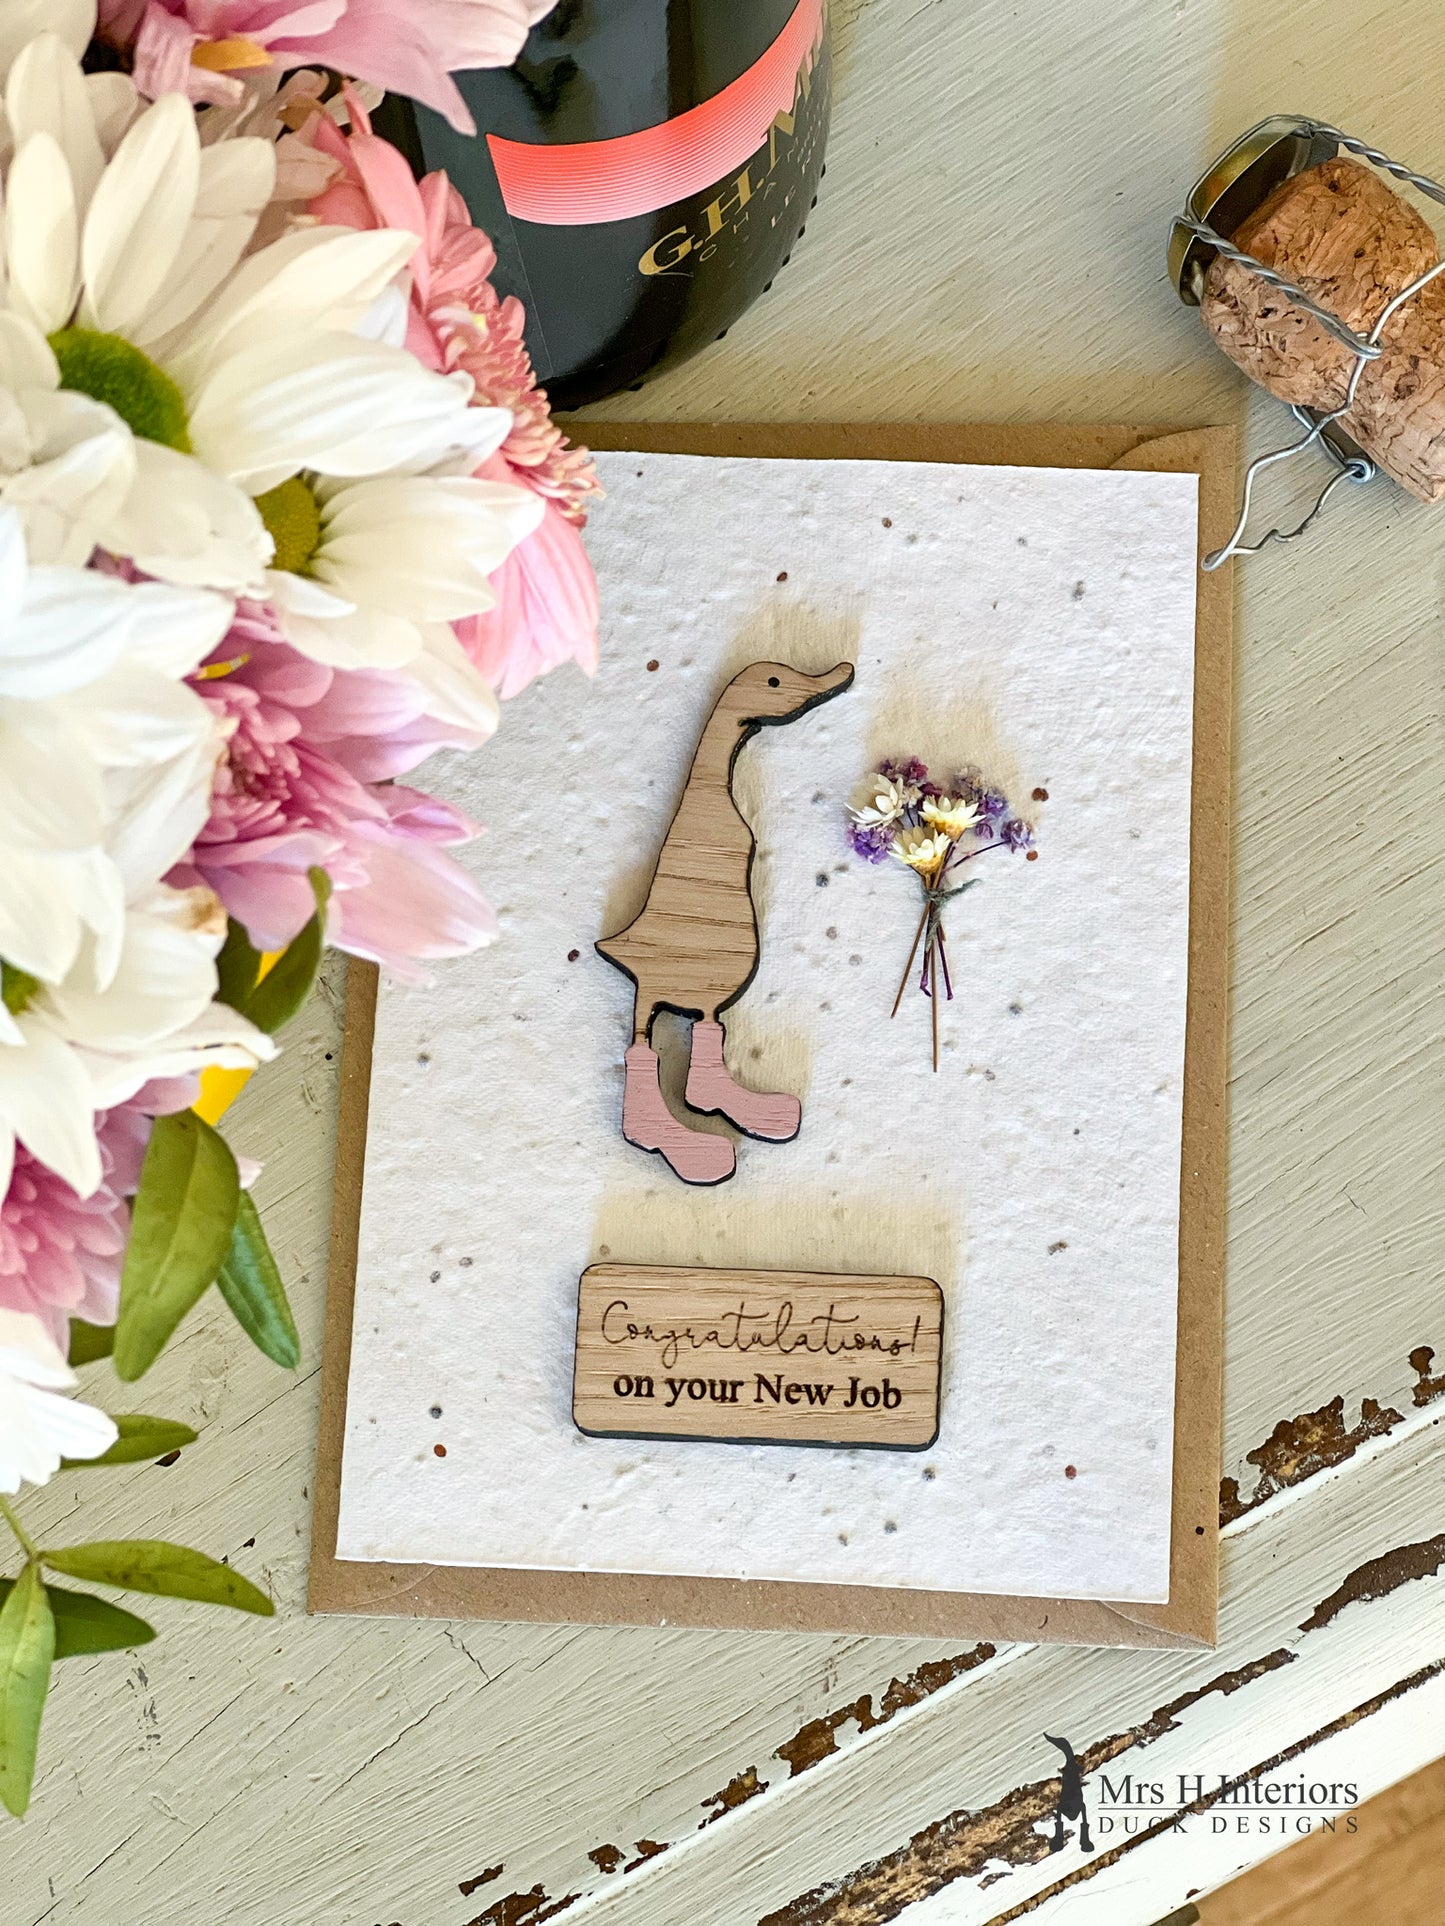 Congratulations on Your New Job Card - Duck with Flowers - Decorated Wooden Duck in Boots by Mrs H the Duck Lady